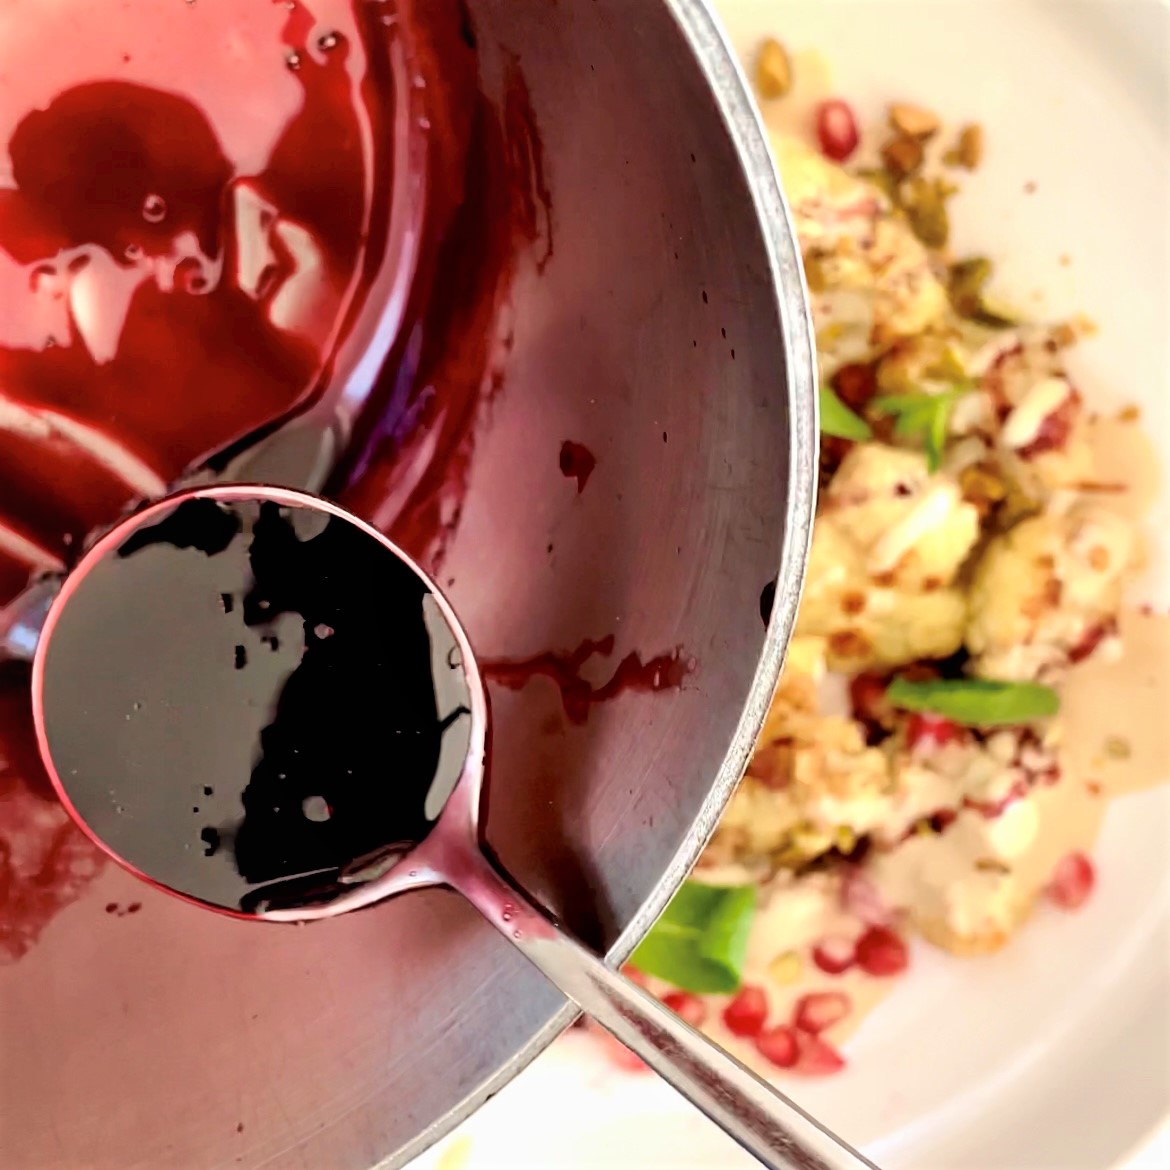 pomegranate reduction sauce in saucepan with a spoon